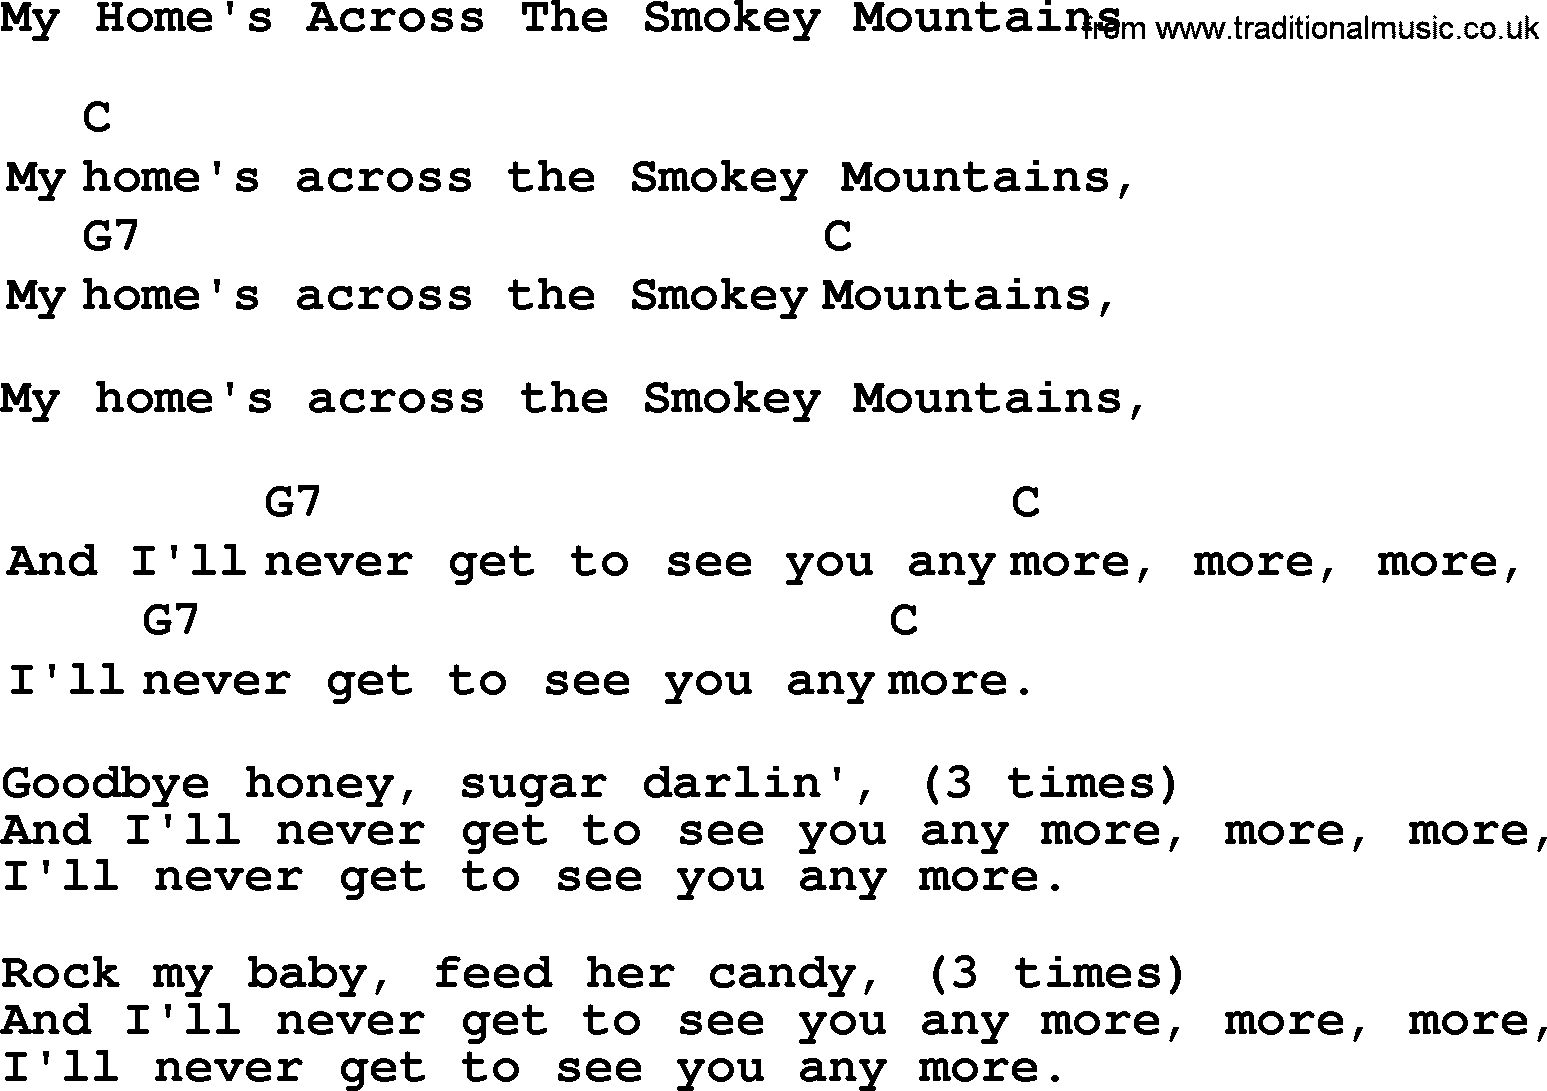 Top 1000 Most Popular Folk and Old-time Songs: My Homes Across The Smokey Mountains, lyrics and chords